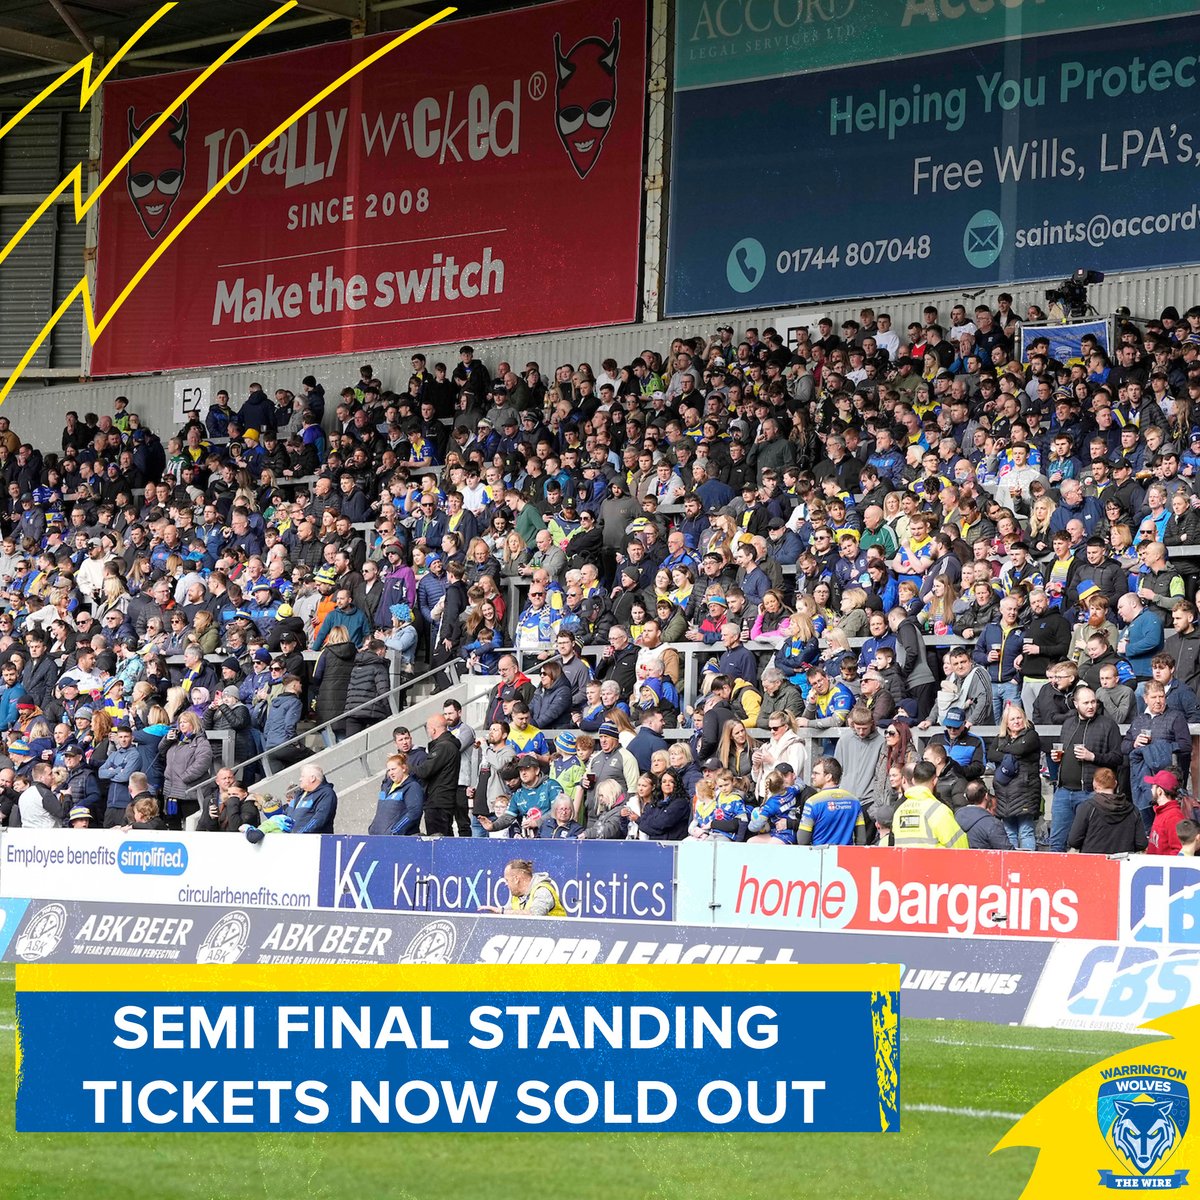 🚨 STANDING TICKETS NOW SOLD OUT!

Seated tickets remain available in-store and online for Sunday's semi final 👉 bit.ly/WWTickets24